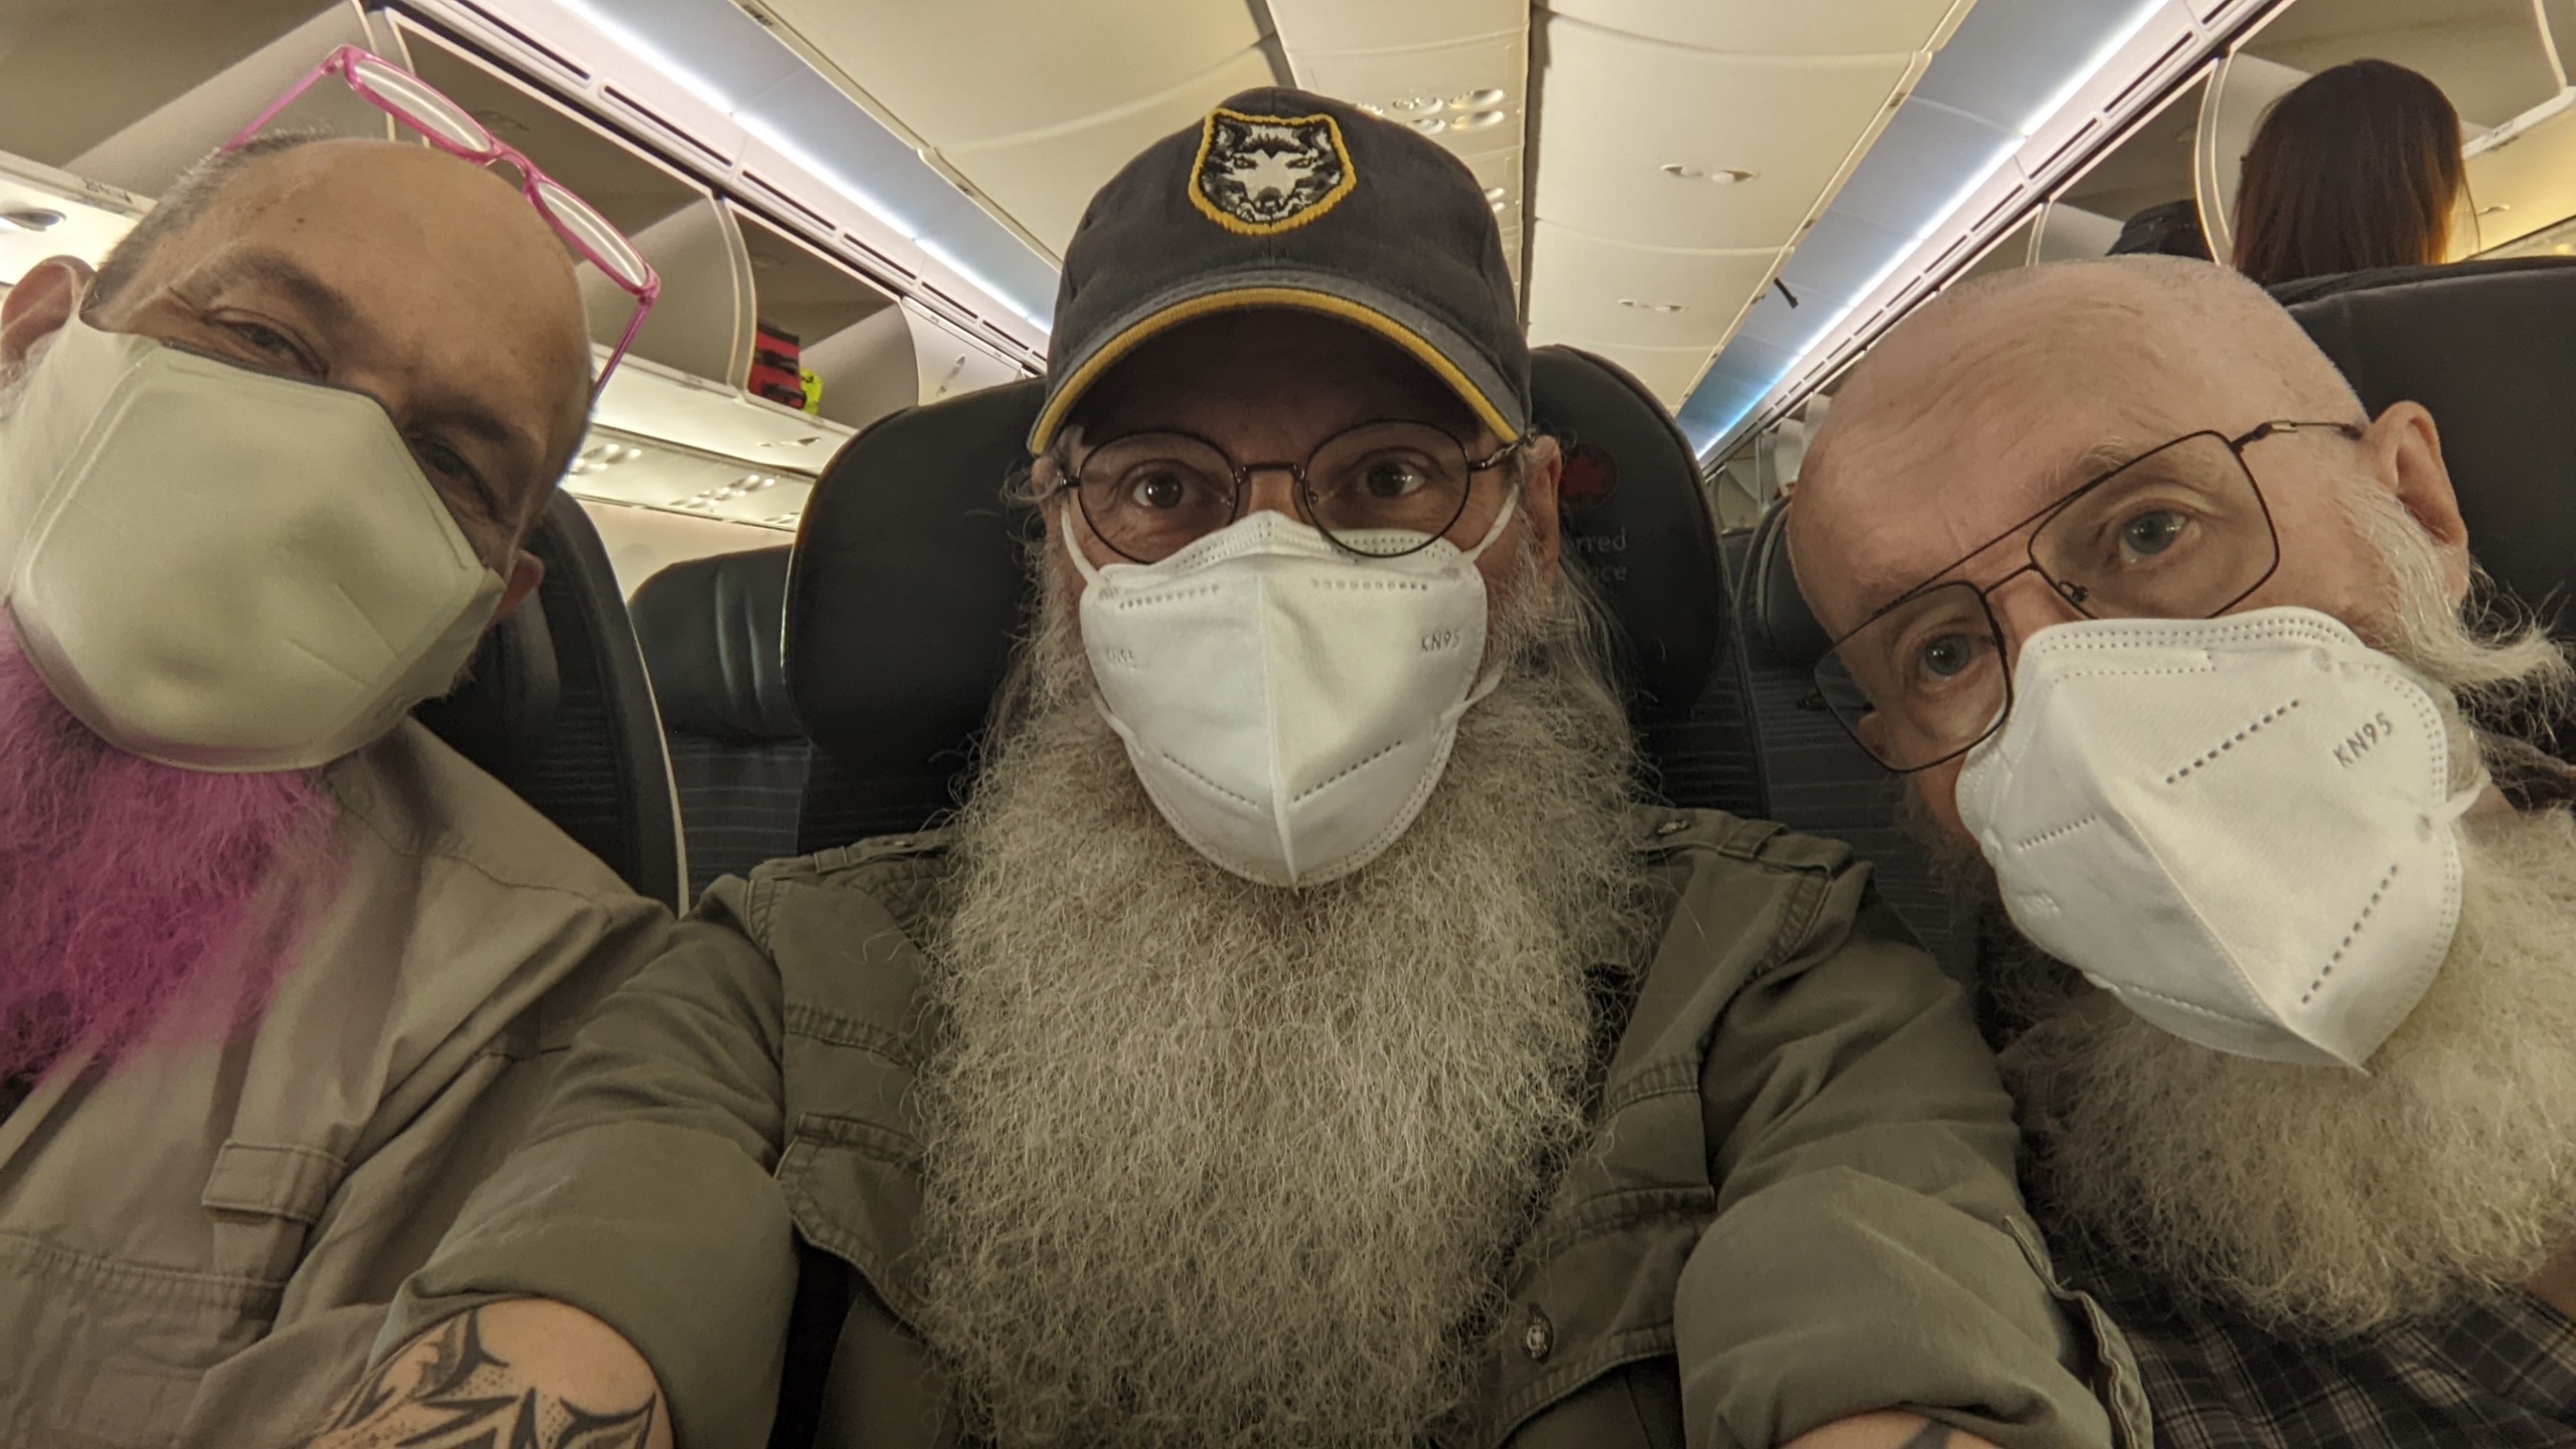 selfie of the three of us on the plane.  Les has a pink beard and we are all masked.